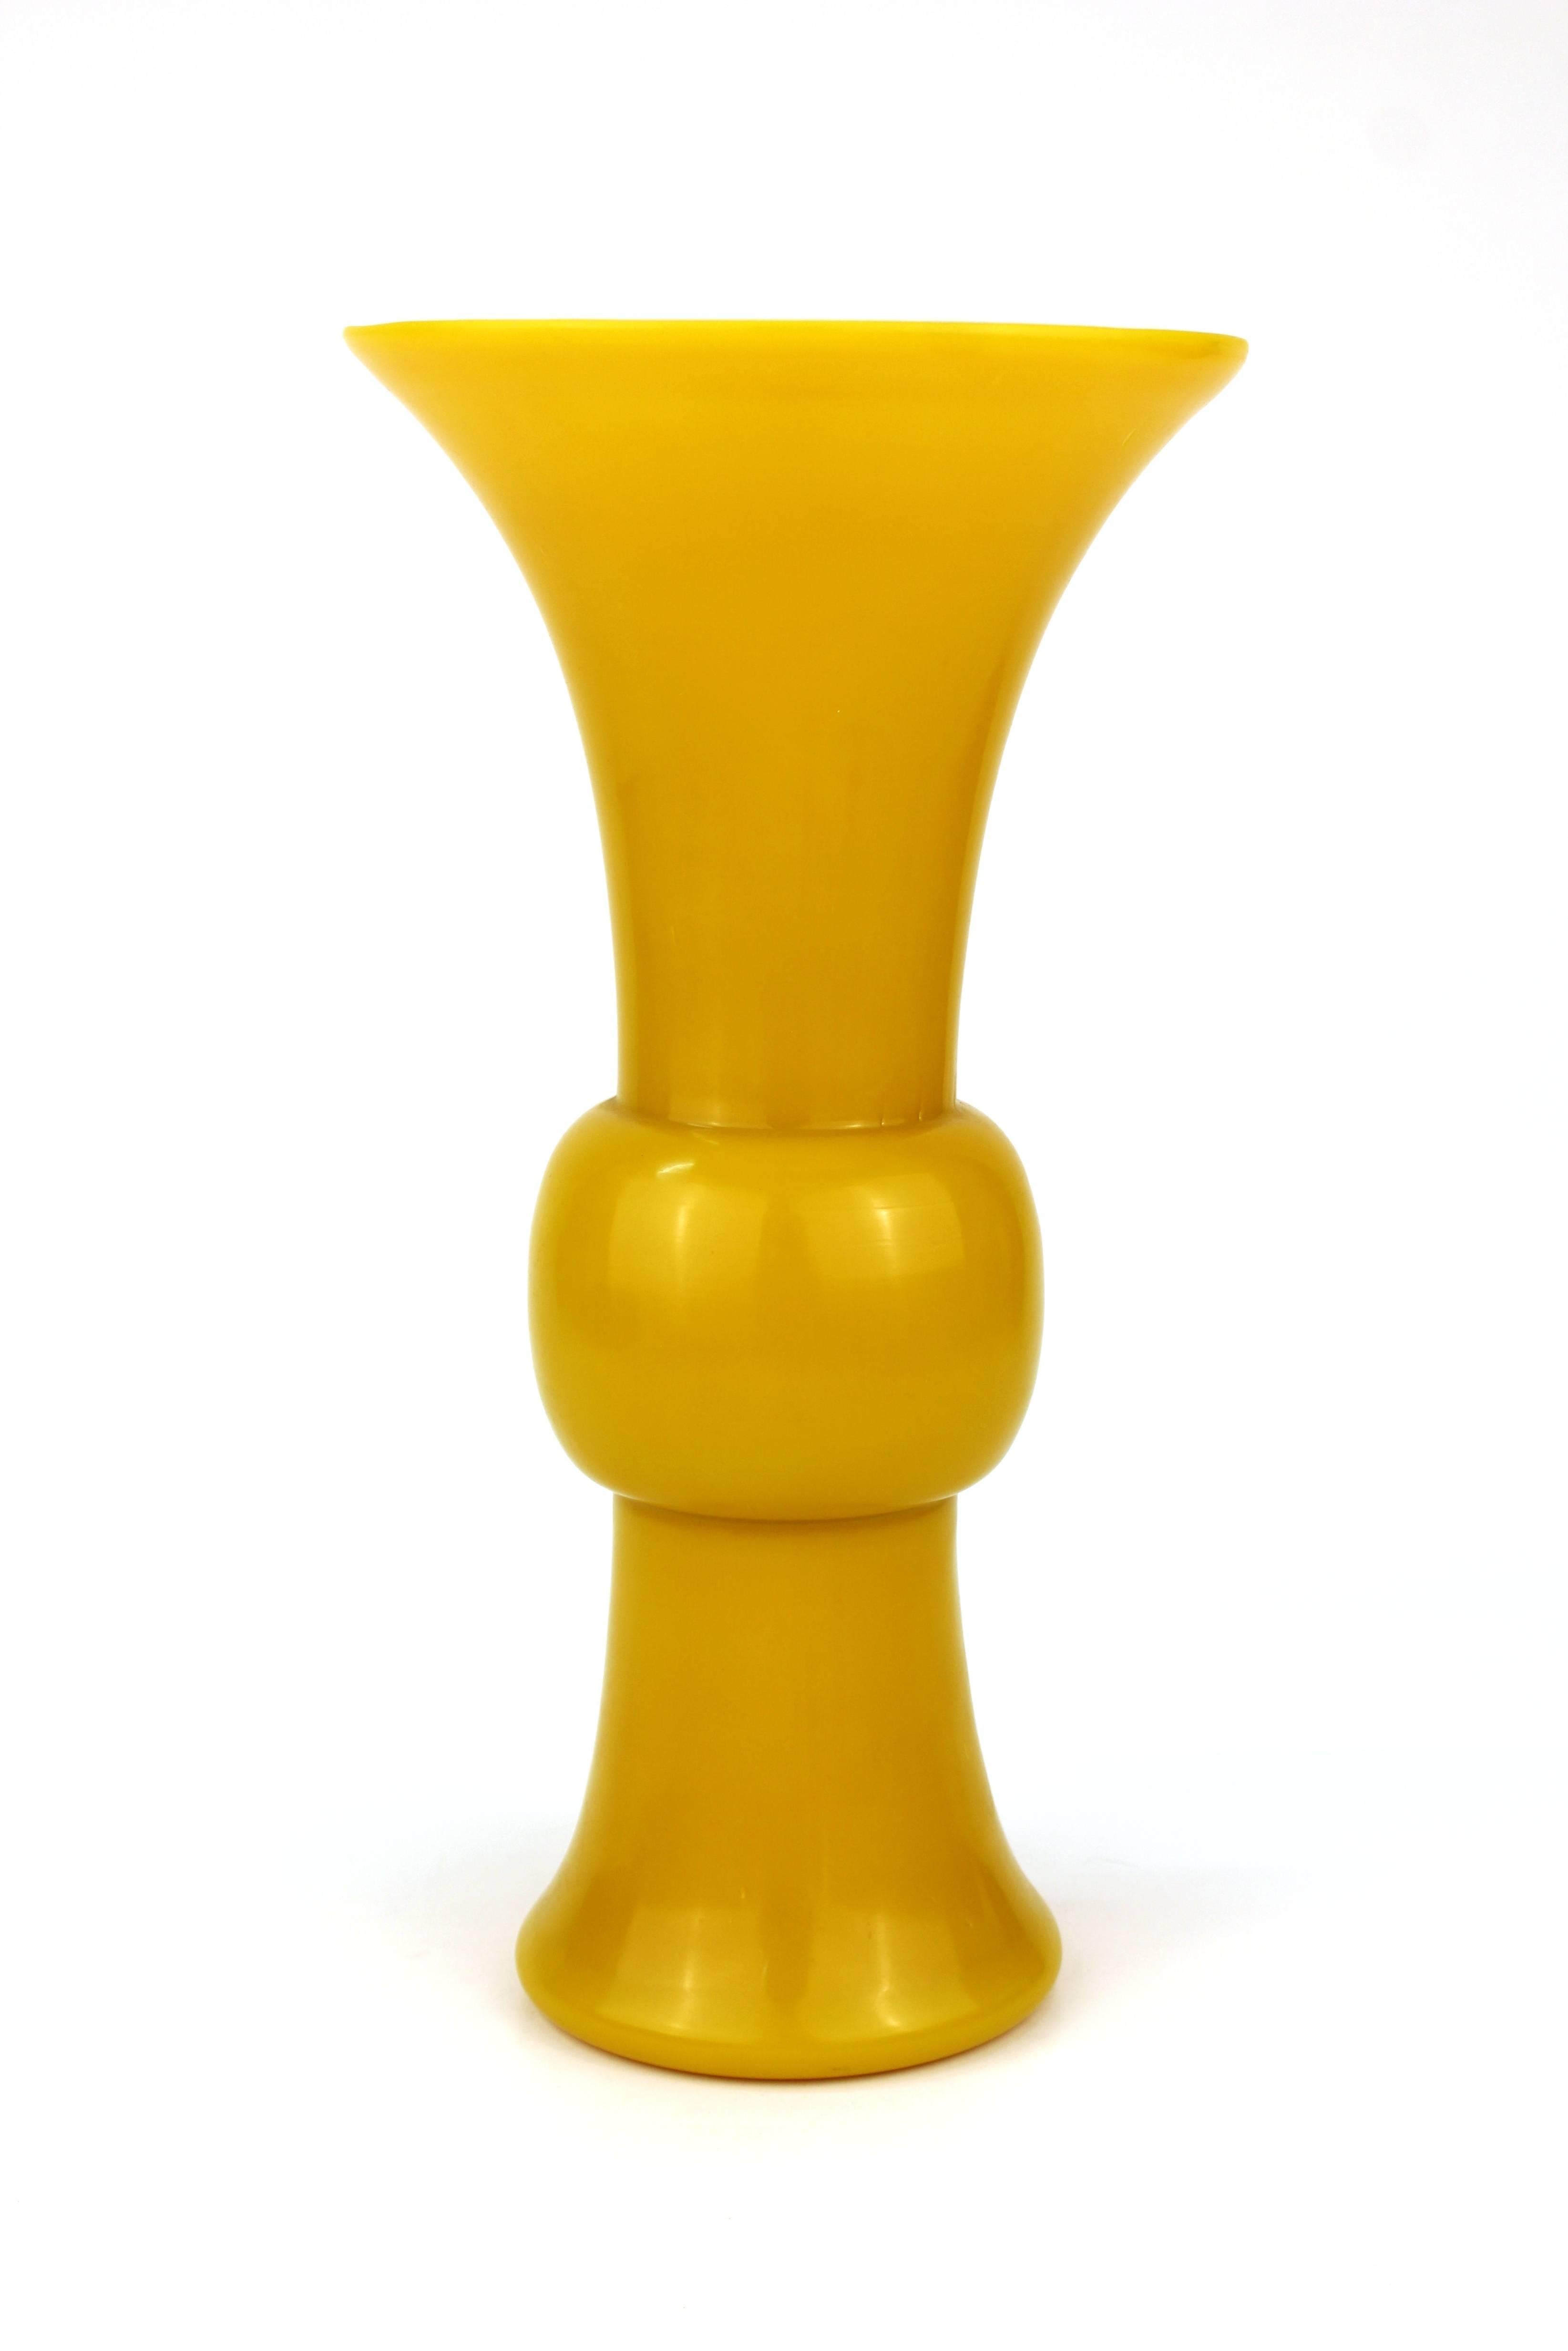 Chinese Peking imperial yellow glass vase, dating from the 1900s. The piece is in good vintage condition and unmarked.